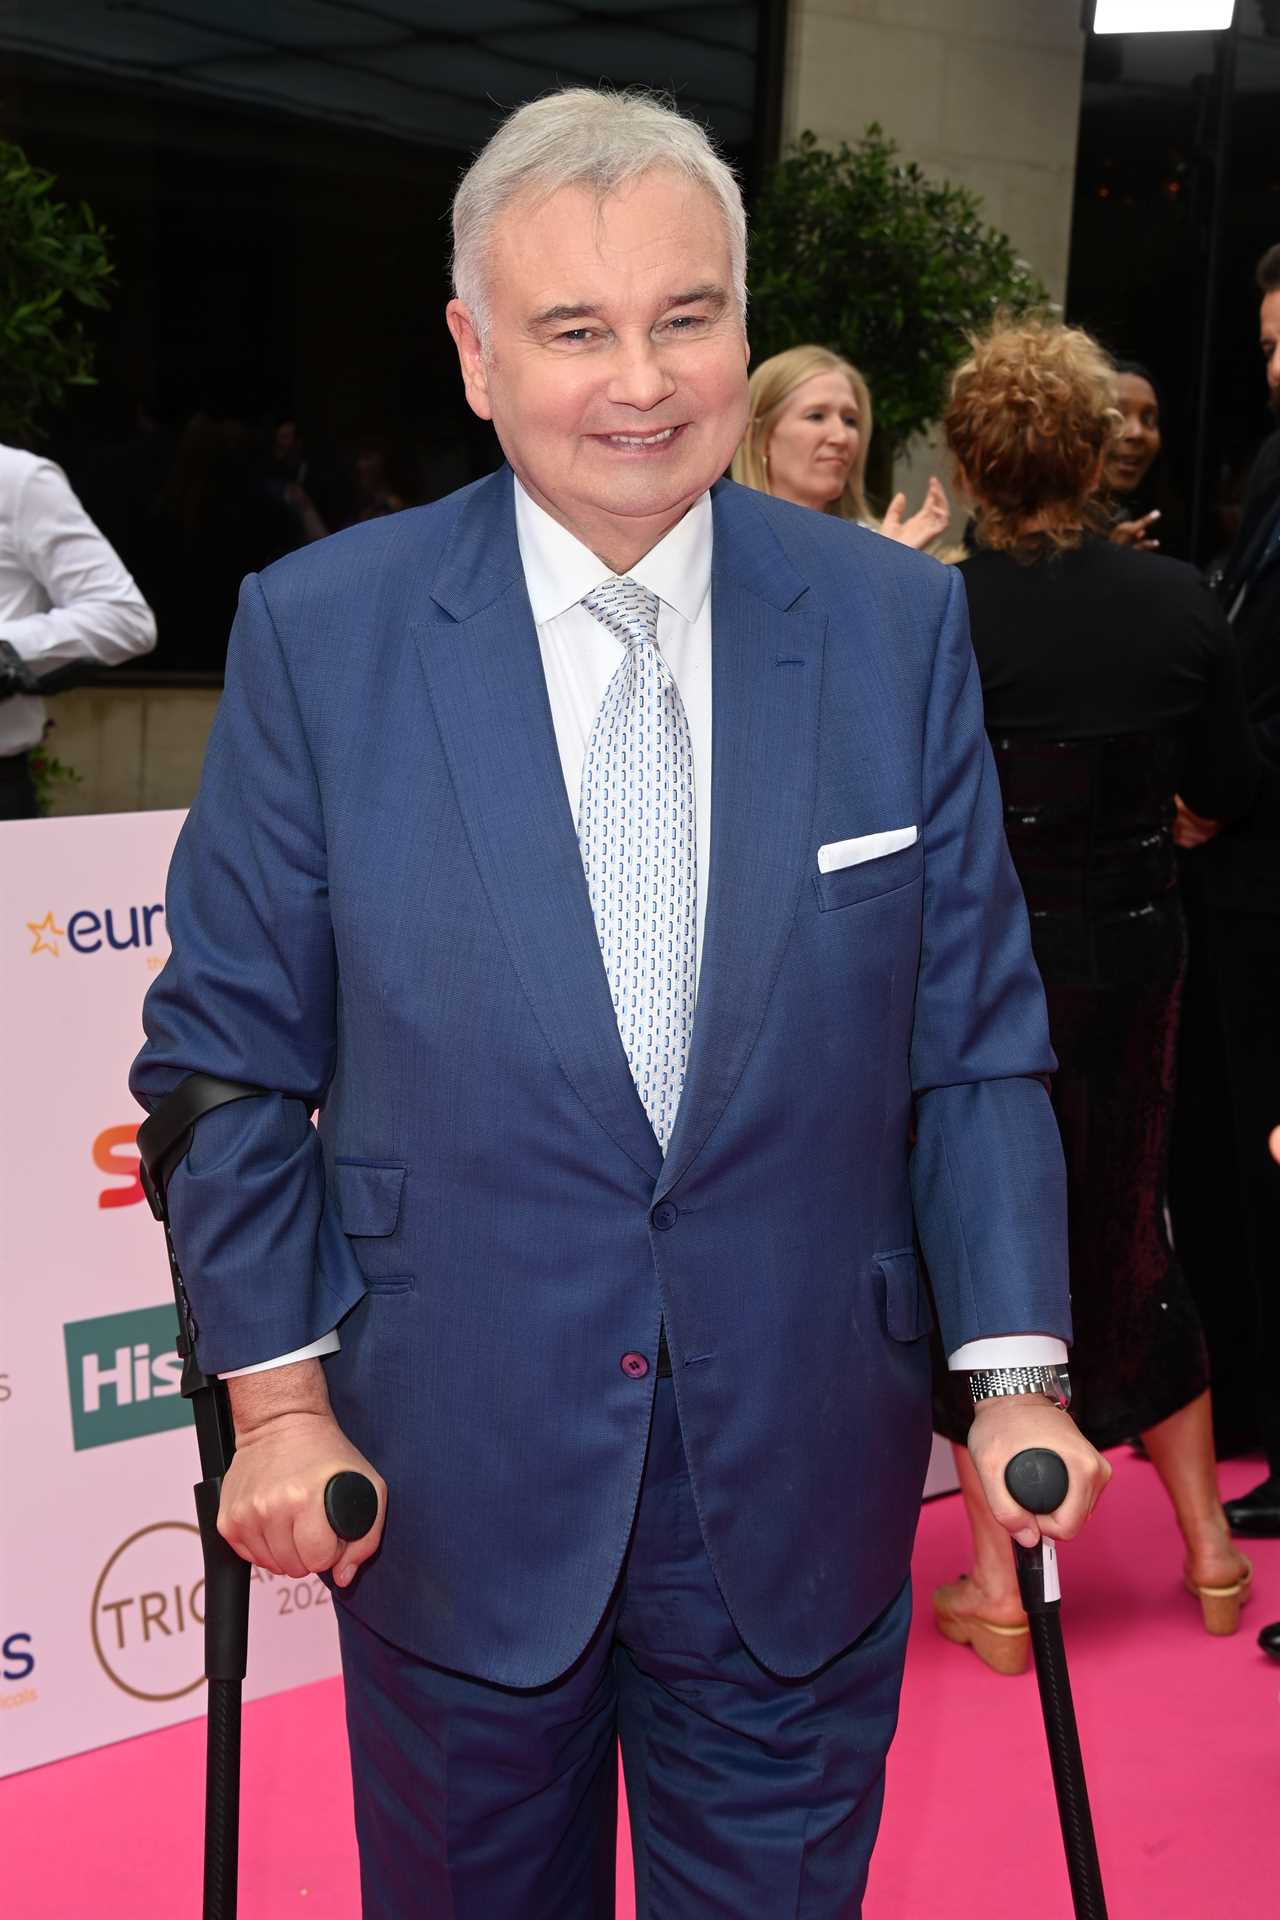 Eamonn Holmes reveals shocking health update: I can't run, I can't walk, I can't do anything